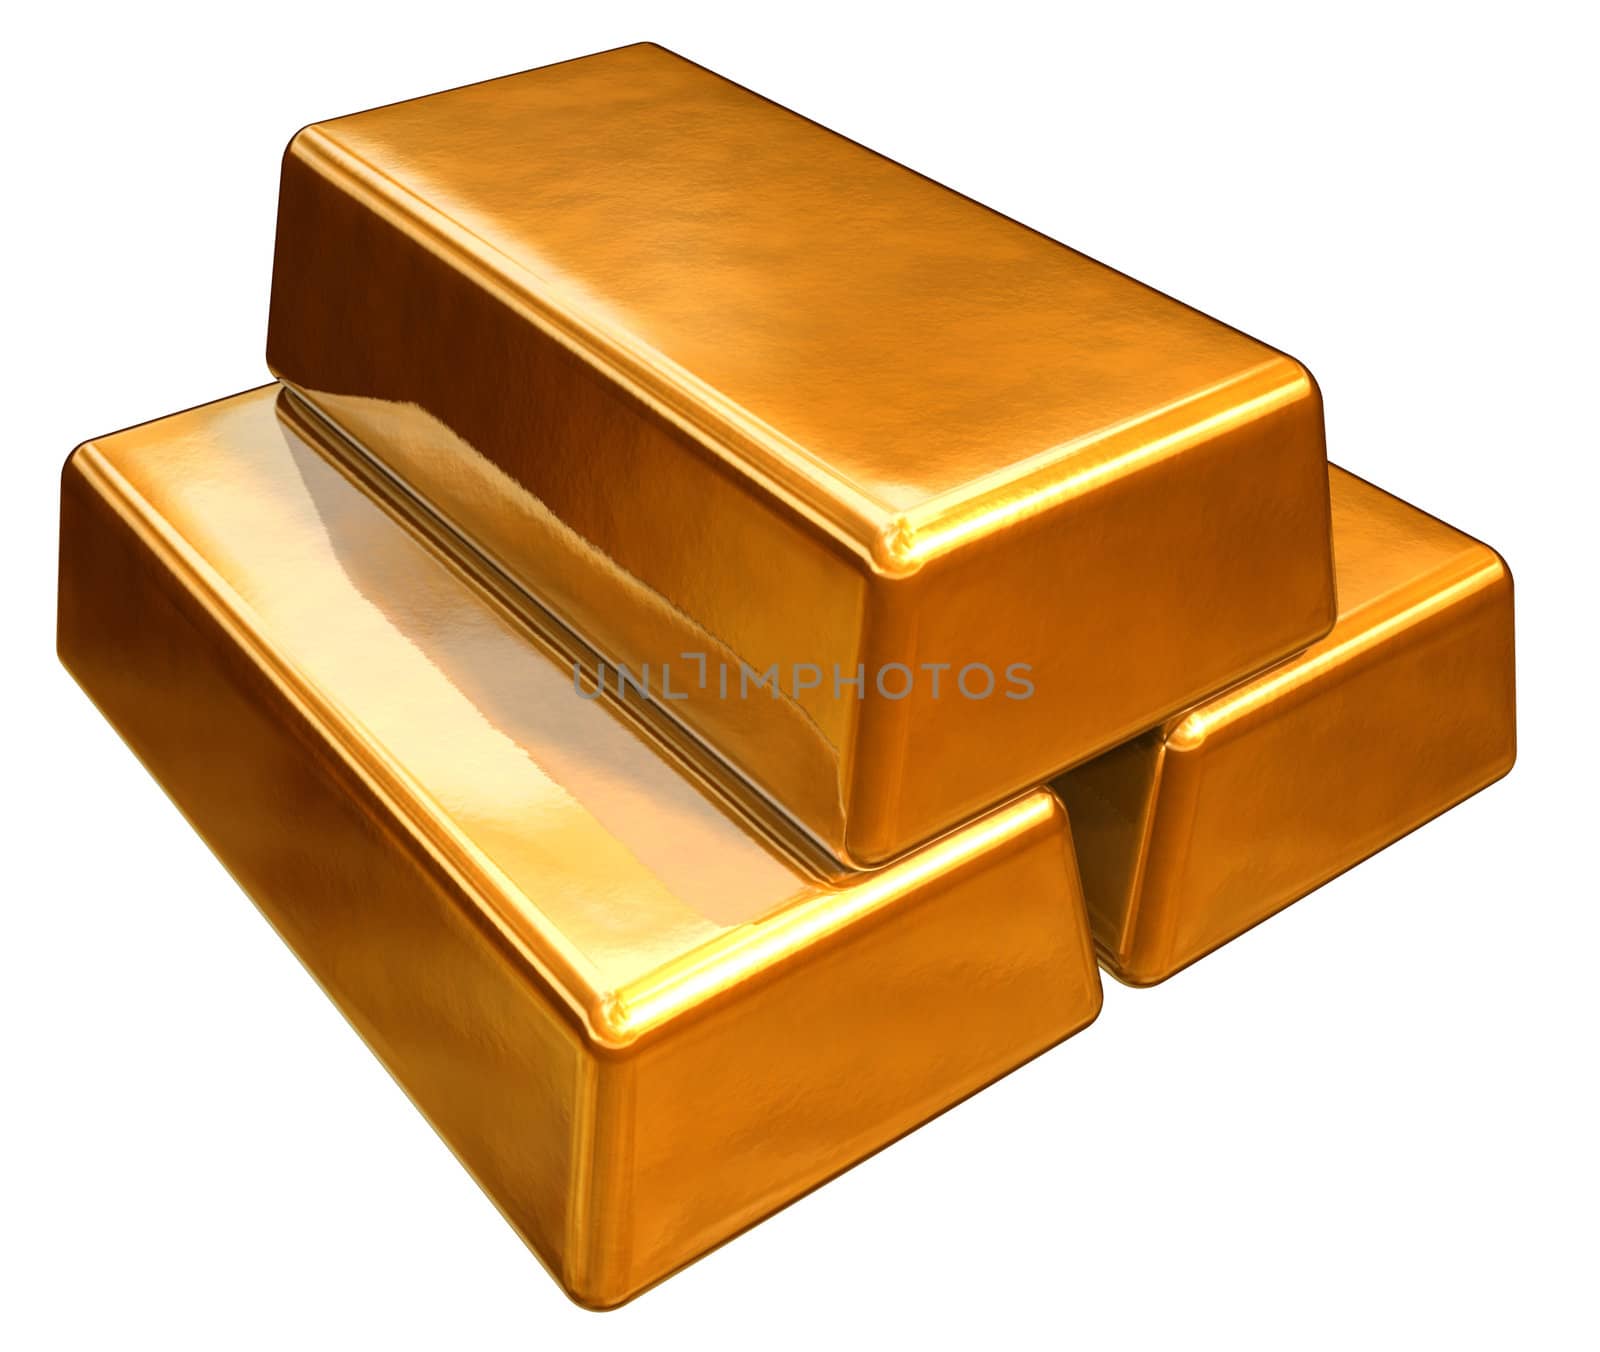 3d gold bars with reflection in white background